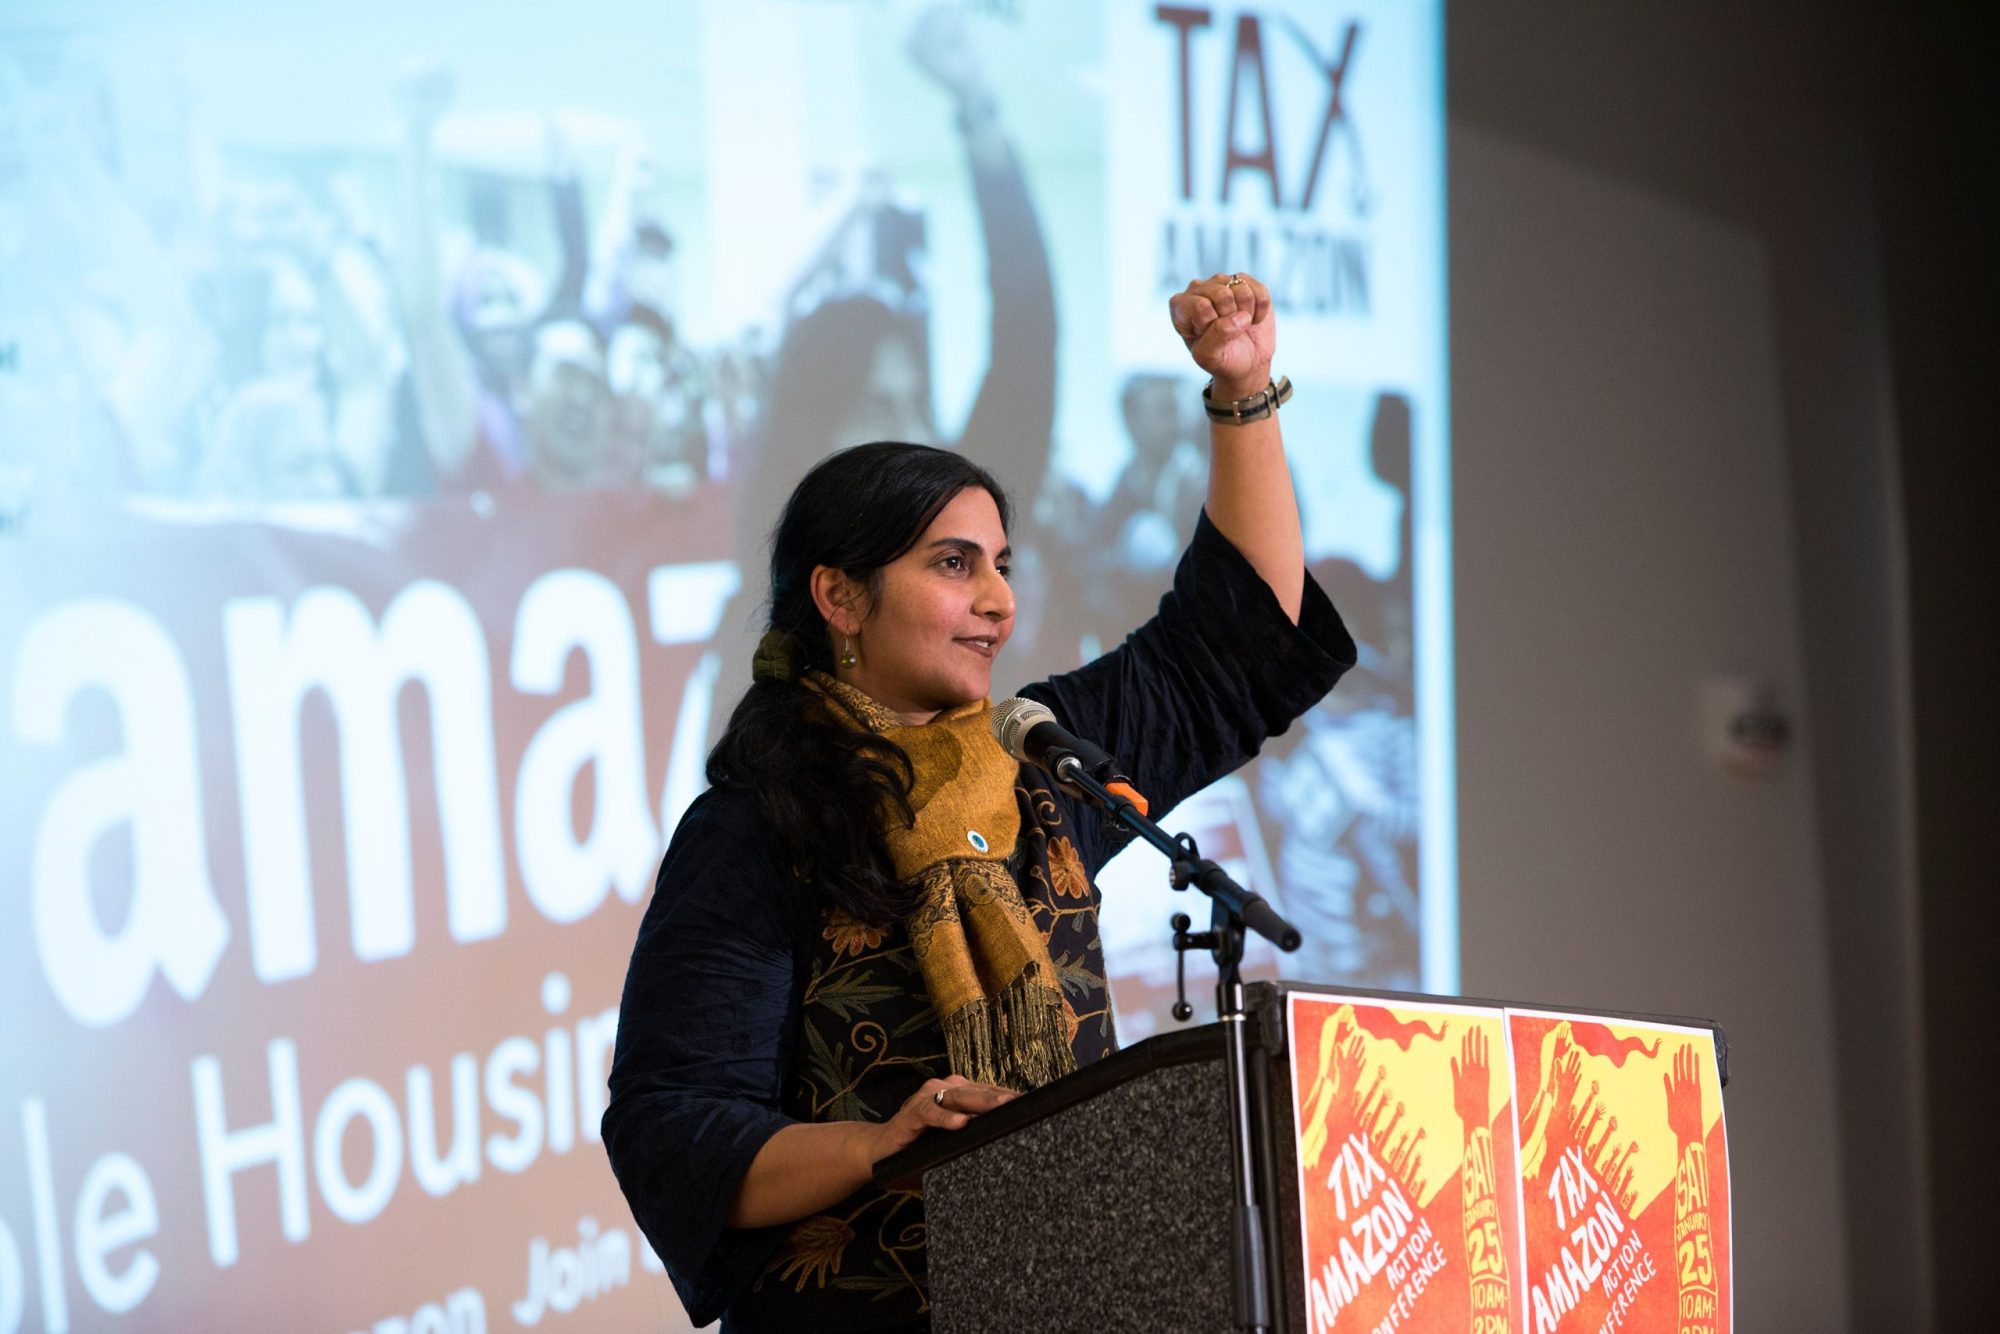 Seattle City Councilmember Kshama Sawant addresses supporters during her inauguration and "Tax Amazon 2020 Kickoff" event in Seattle, Washington on January 13, 2020.